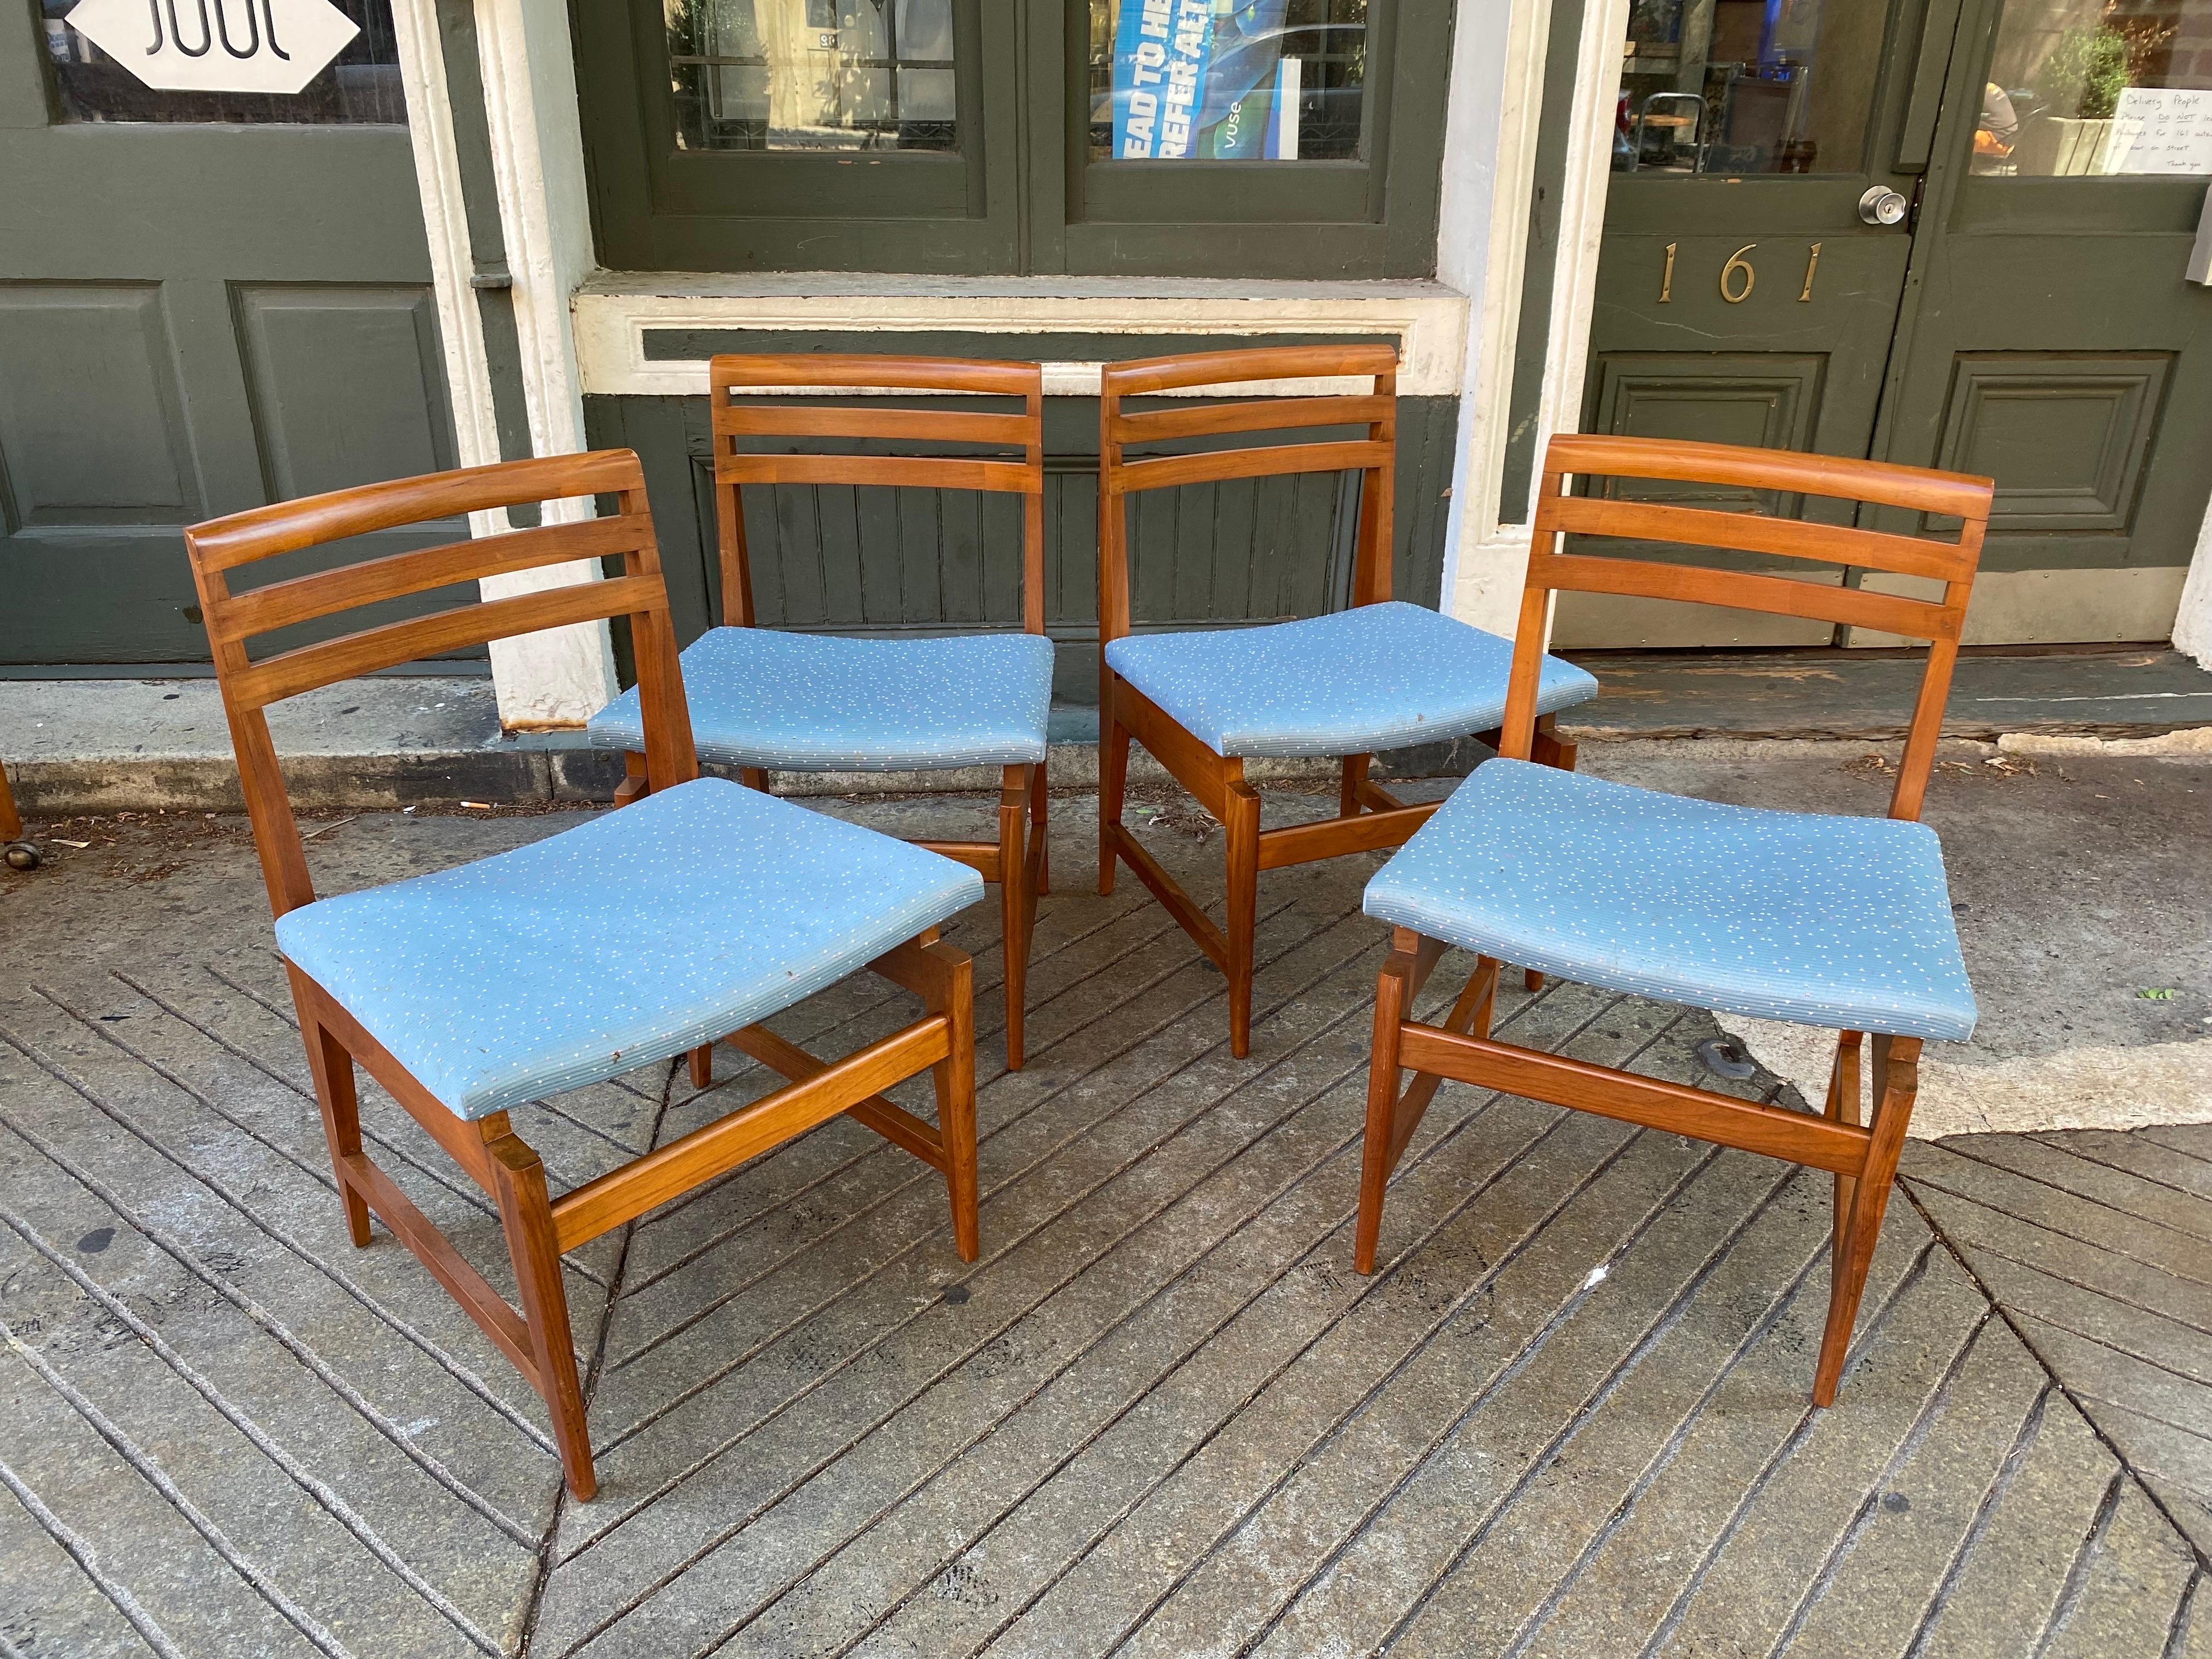 William Pahlmann for Hastings set of 4 dining chairs. Beautiful well constructed chairs with a unique construction! Seat has a floating quality as it sits above the legs. Very Solid, seats need to be redone. Wood is clean original condition!